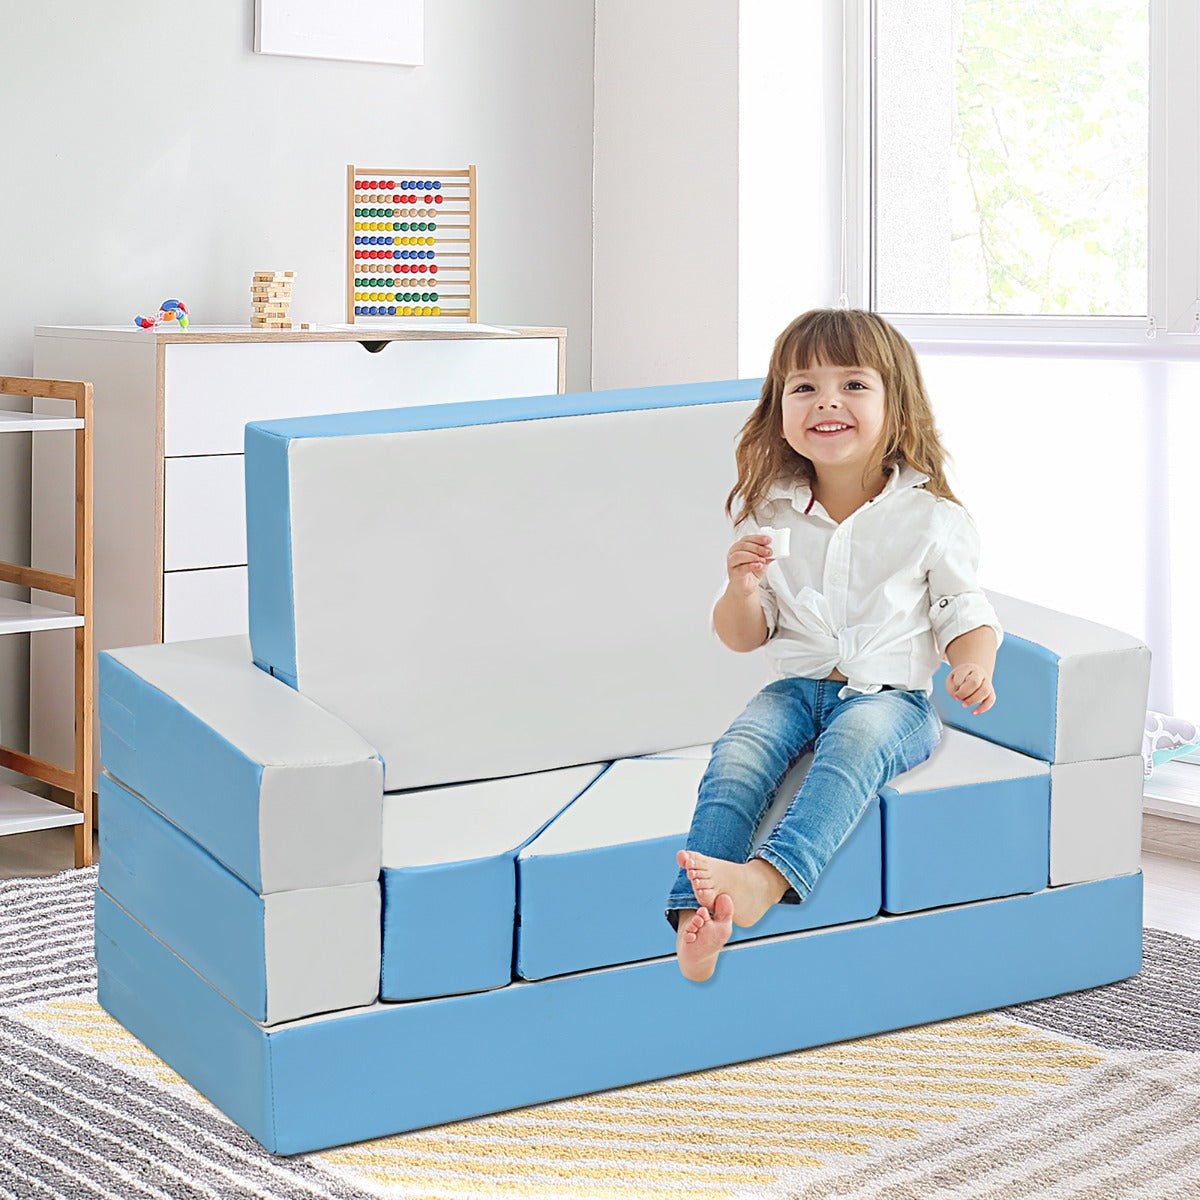 4-In-1 Children's Sofa Set - Blue Combo with Sturdy PU Surface